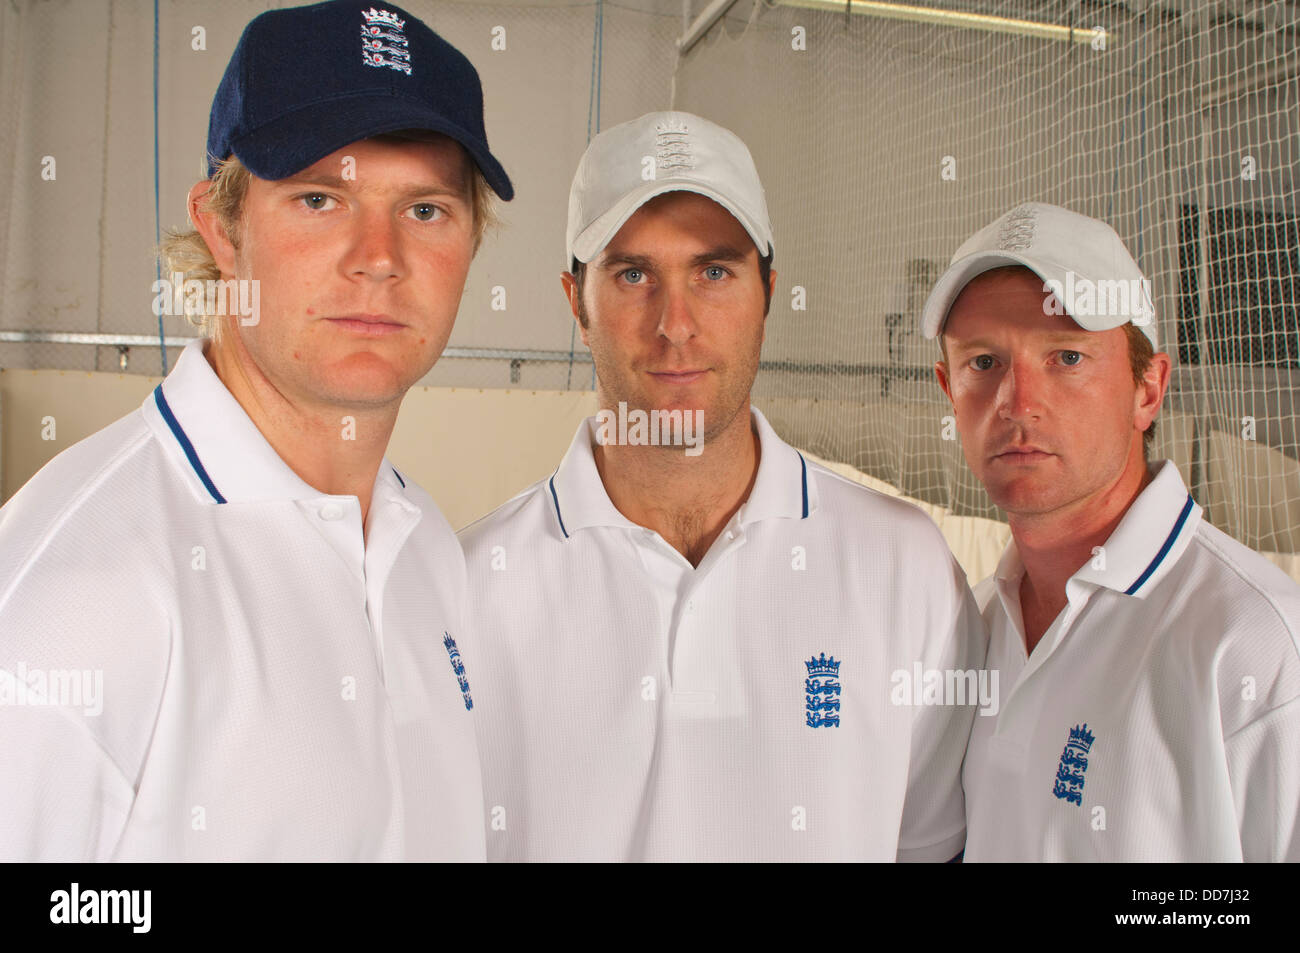 England cricketers Michael Vaughan, Matthew Hoggard and Paul Collingwood in Admiral cricket kit Stock Photo